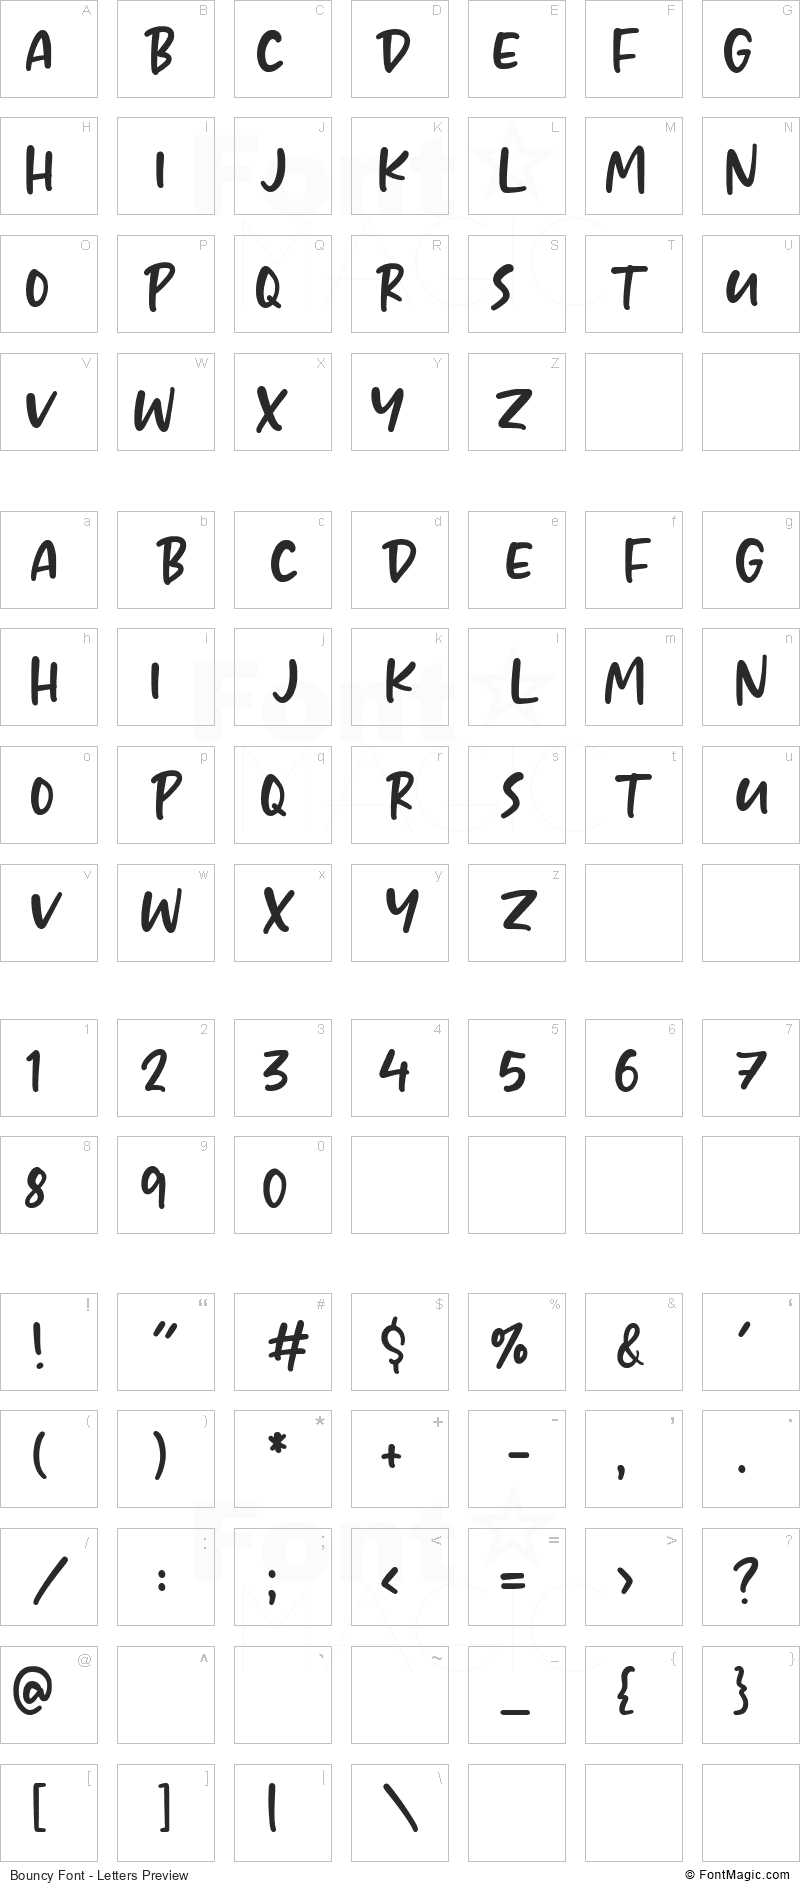 Bouncy Font - All Latters Preview Chart